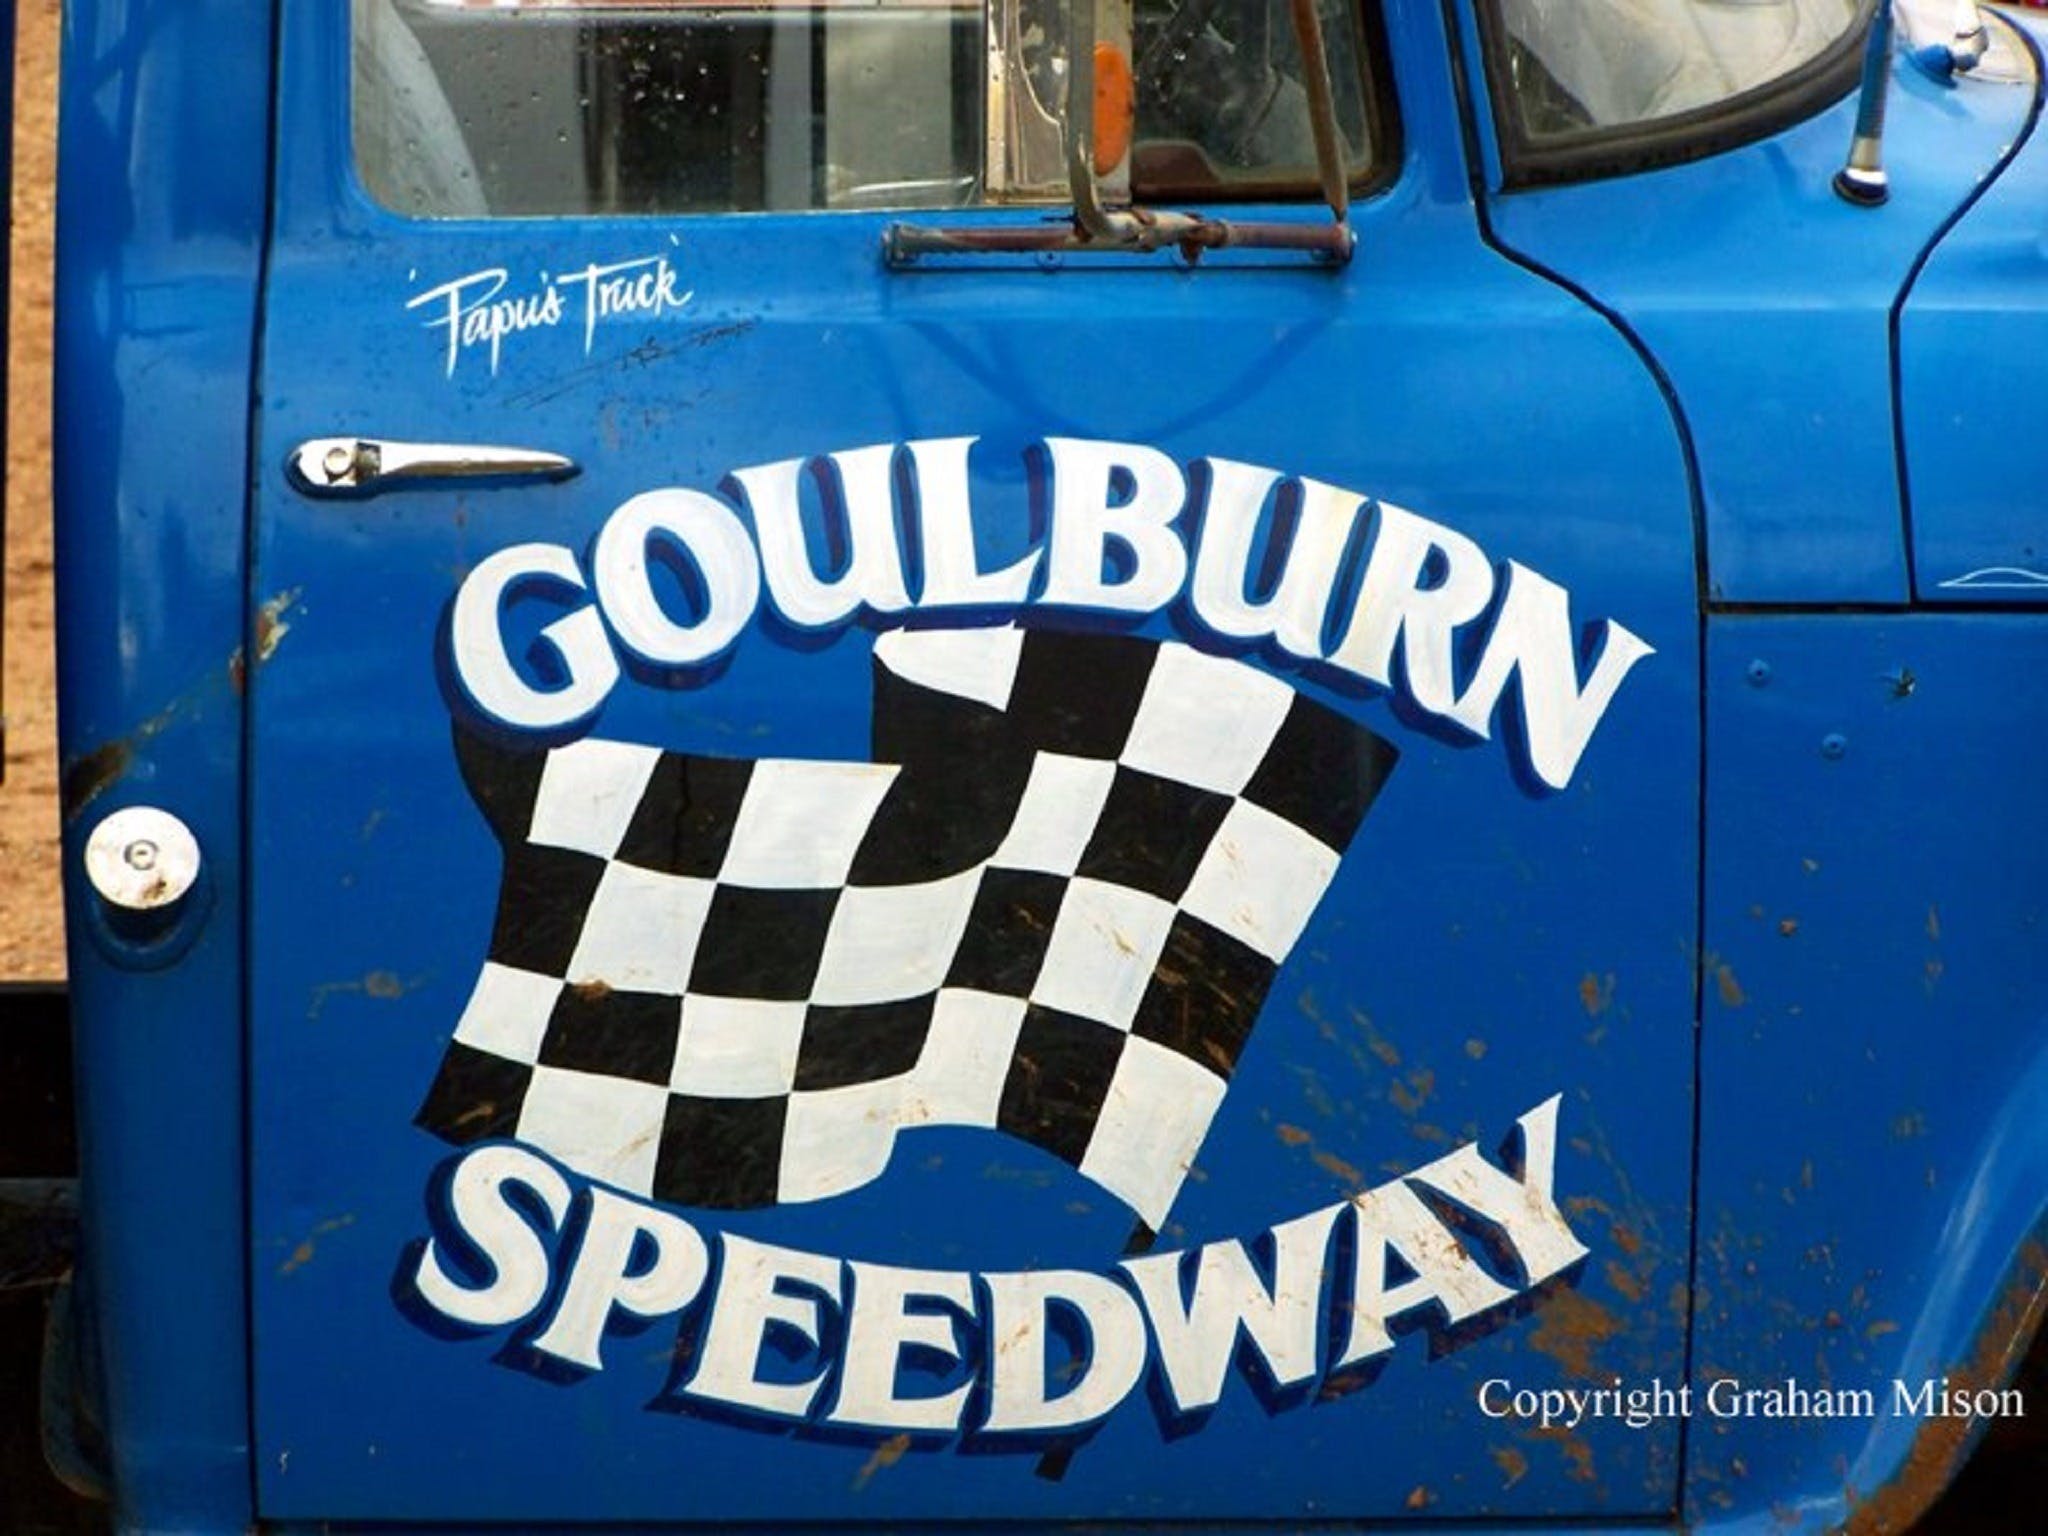 50 years of racing at Goulburn Speedway - Tourism Canberra